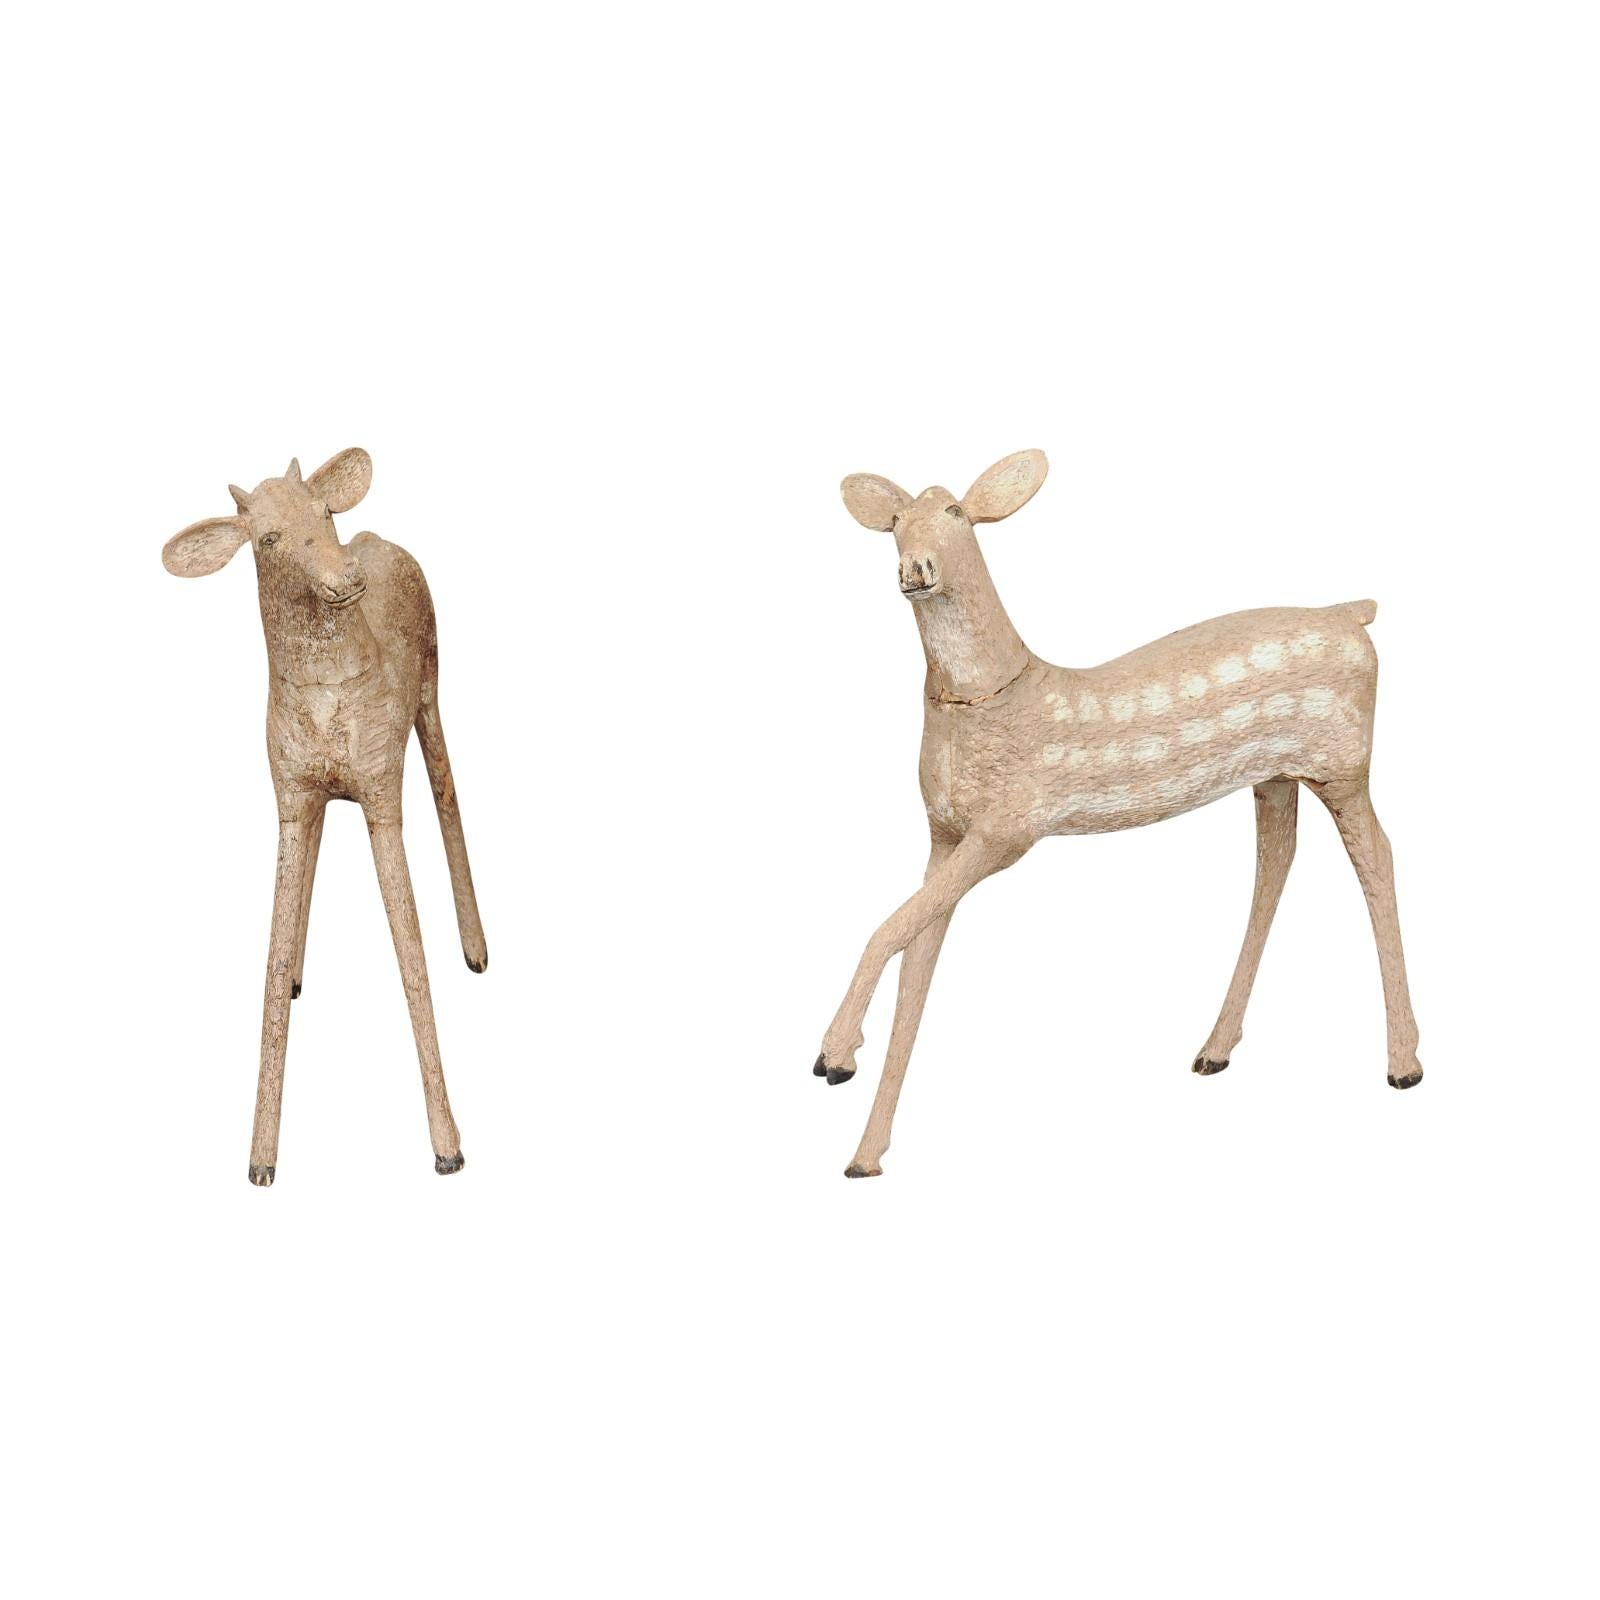 Pair of Naive Style Carved Wooden Fawns from New Hampshire Lodge, circa 1930